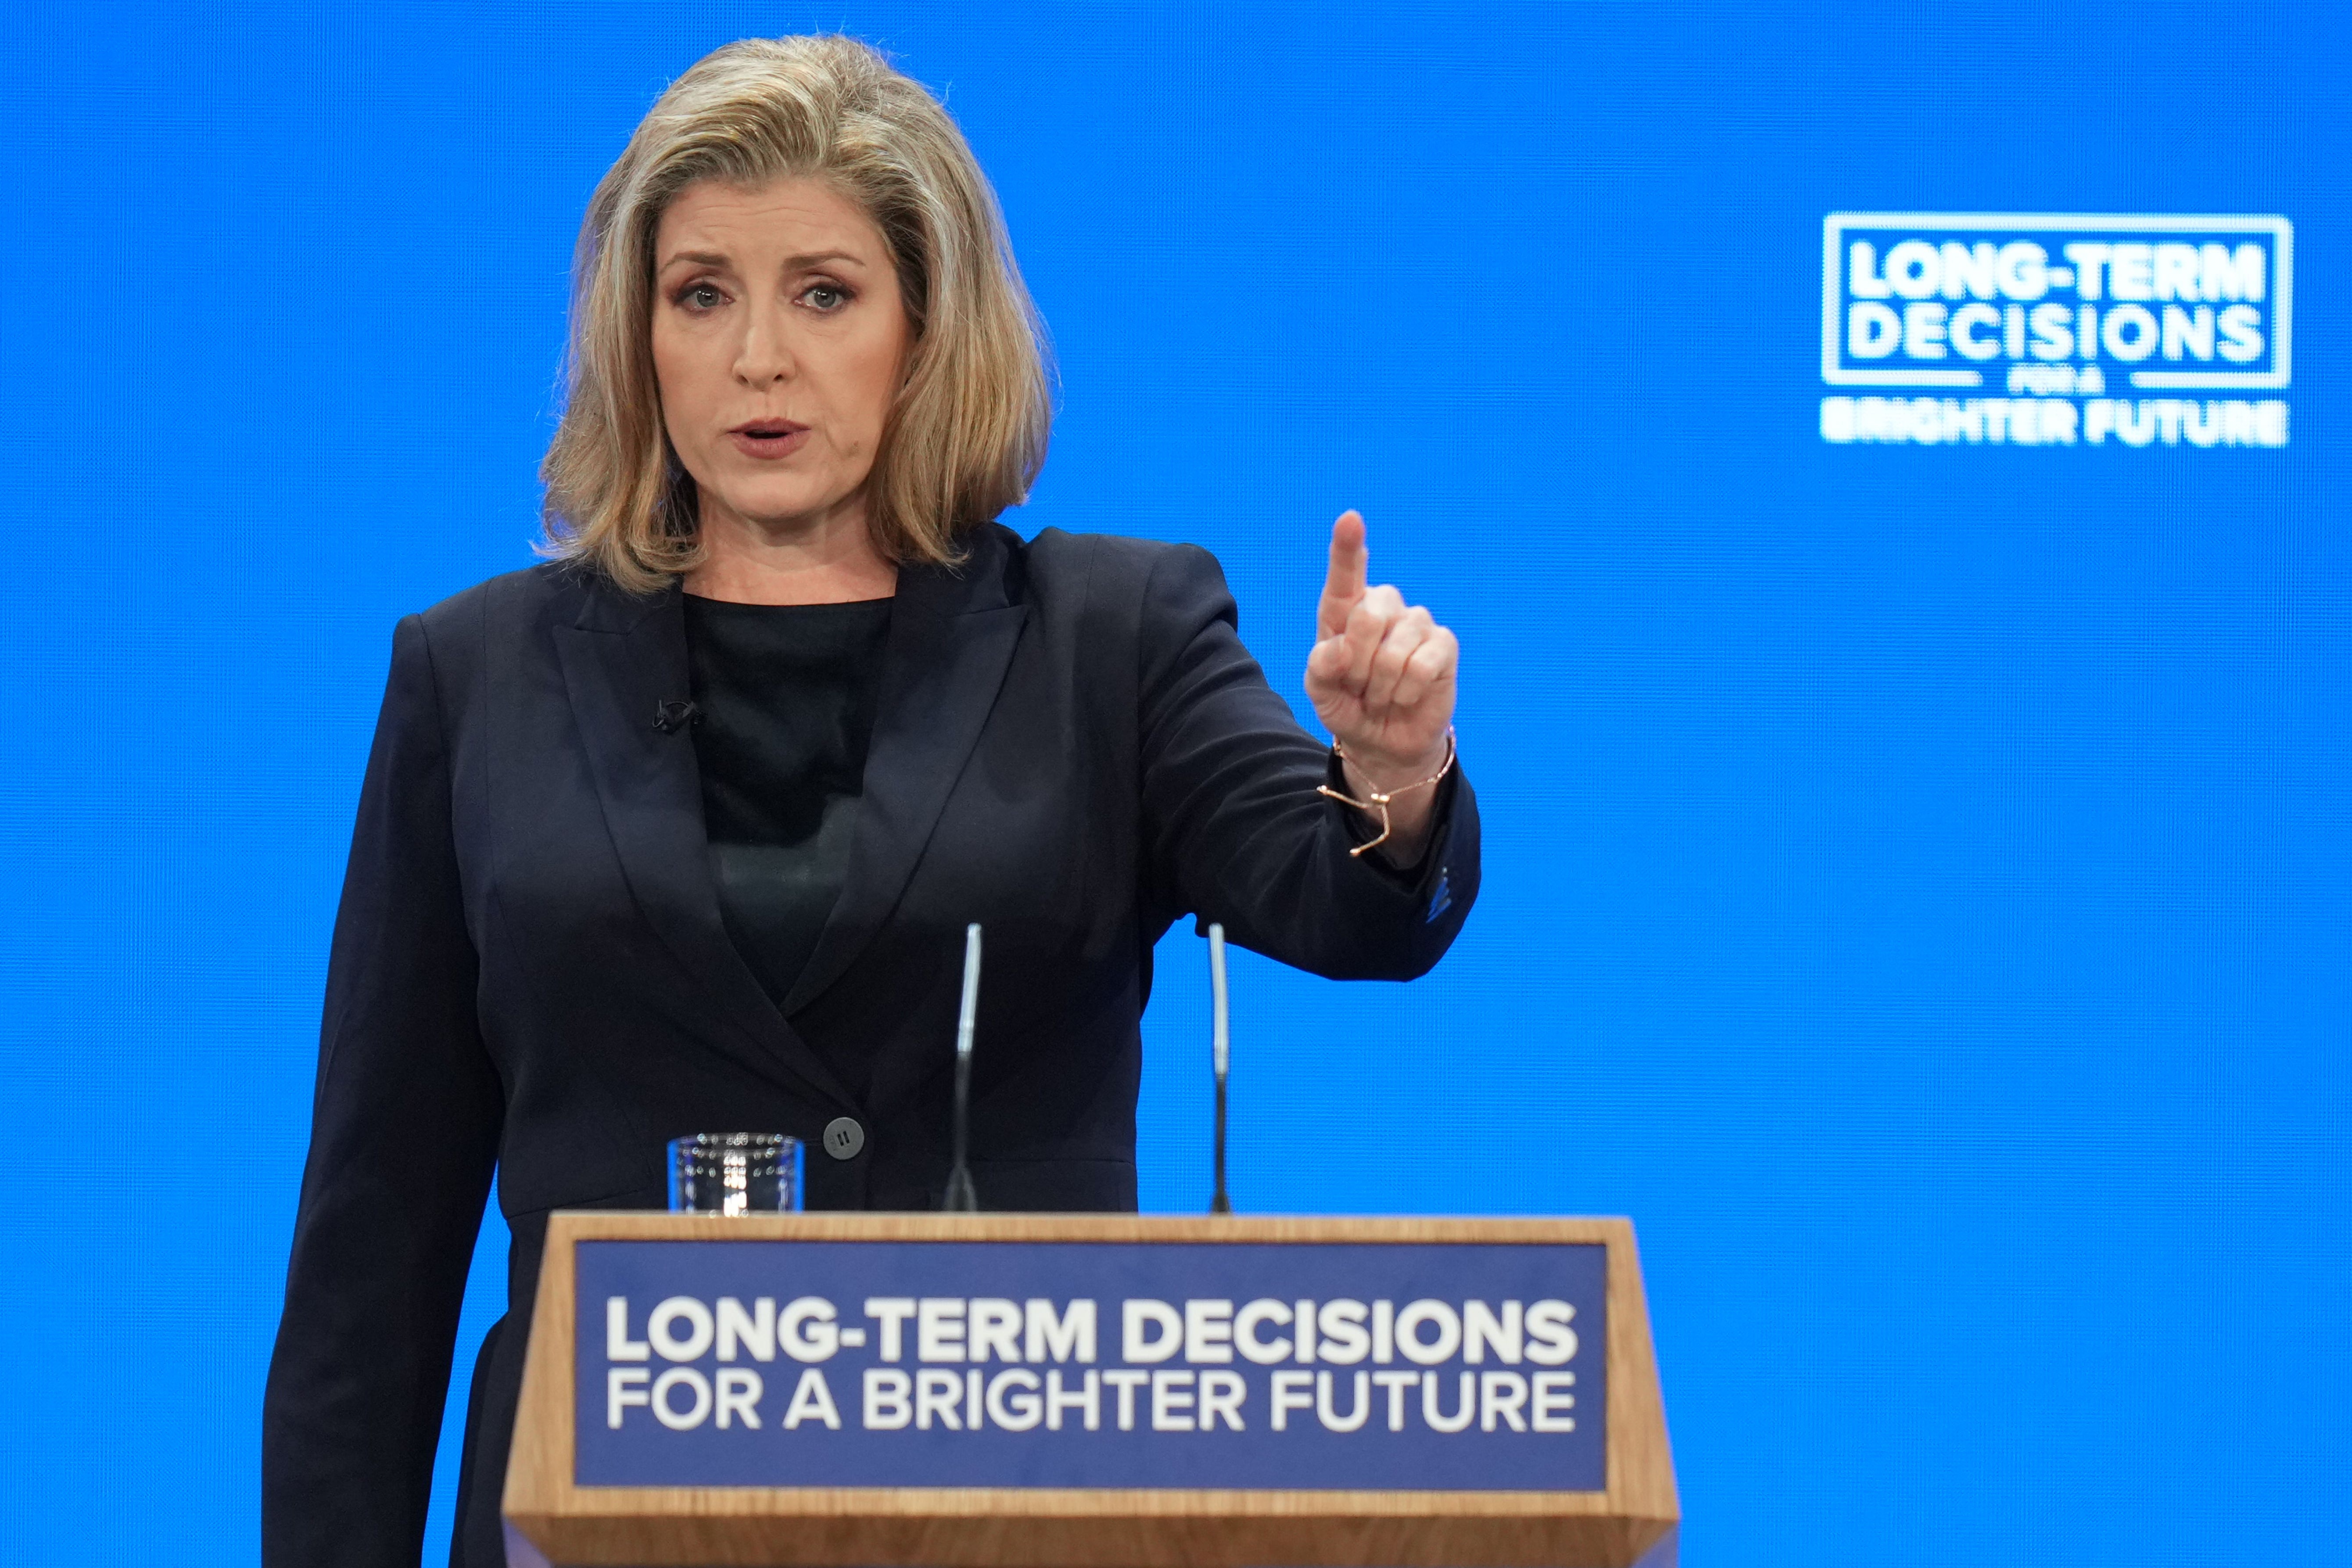 Leader of the House of Commons Penny Mordaunt has not commented on the claims but allies suggested she was focusing on her ministerial role